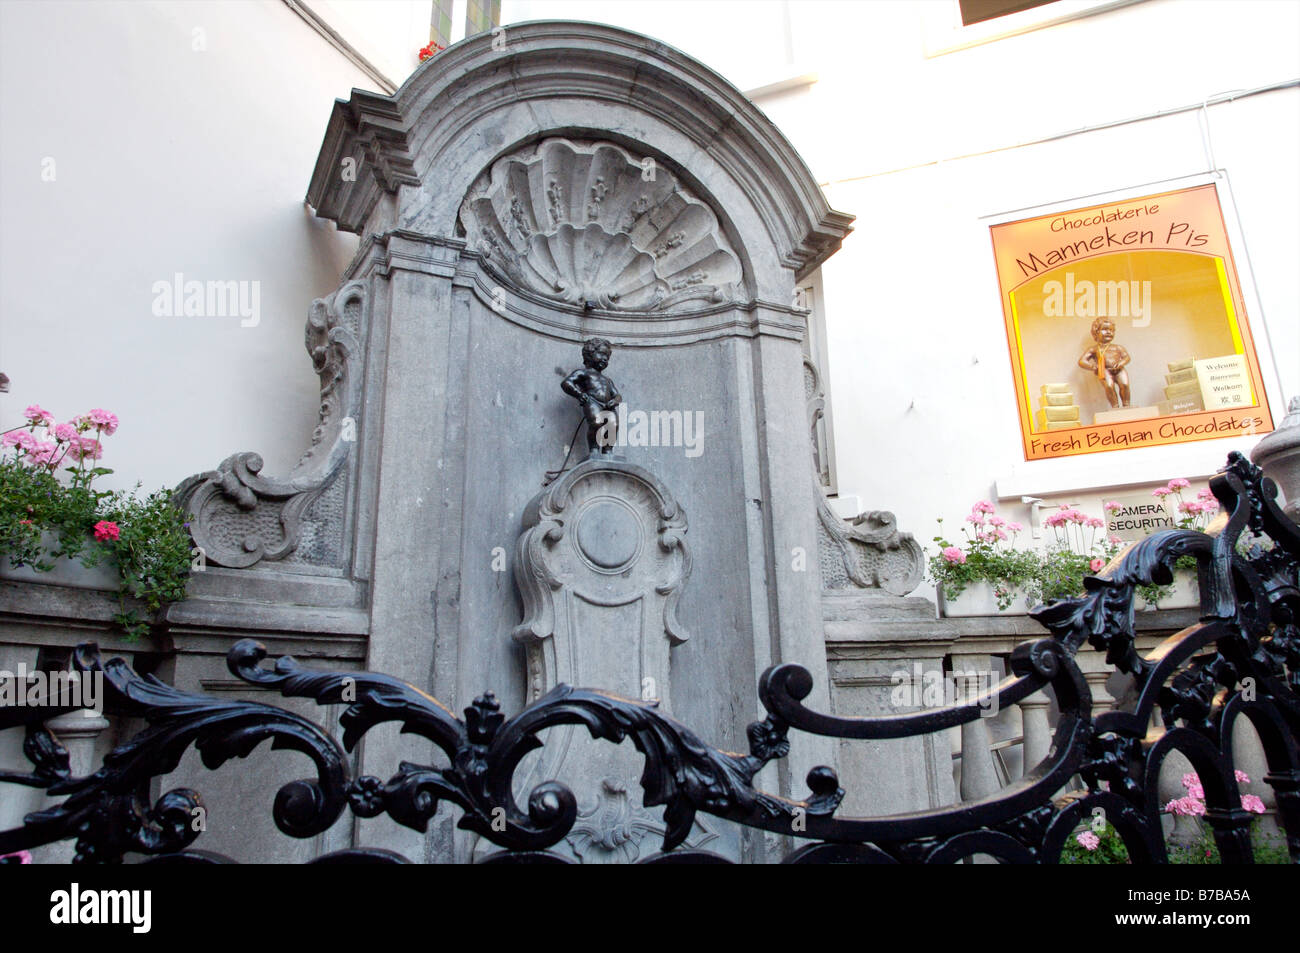 Mannequin Pis statue in Brussels Belgium on July 19 2007 The sculpture was created by Jerome Duqusnoy Manneken Pis Stock Photo